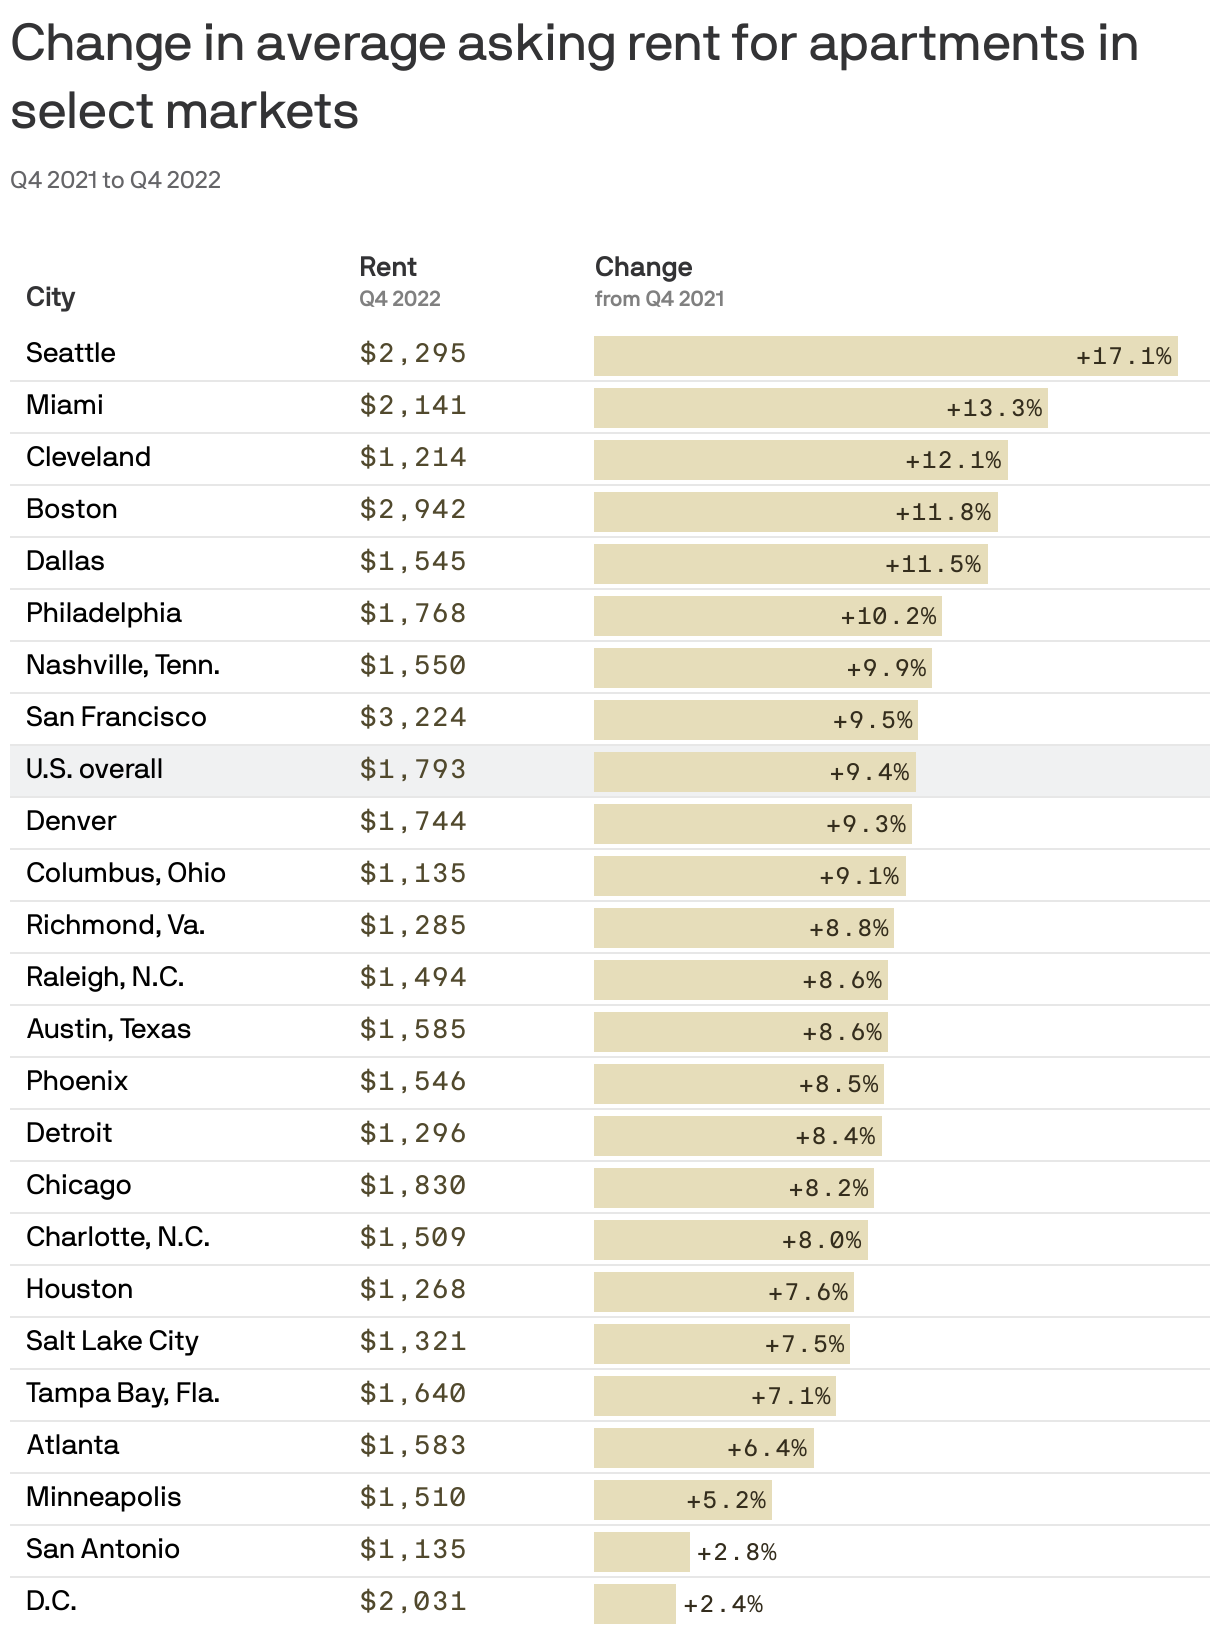 Change in average asking rent for apartments in select markets